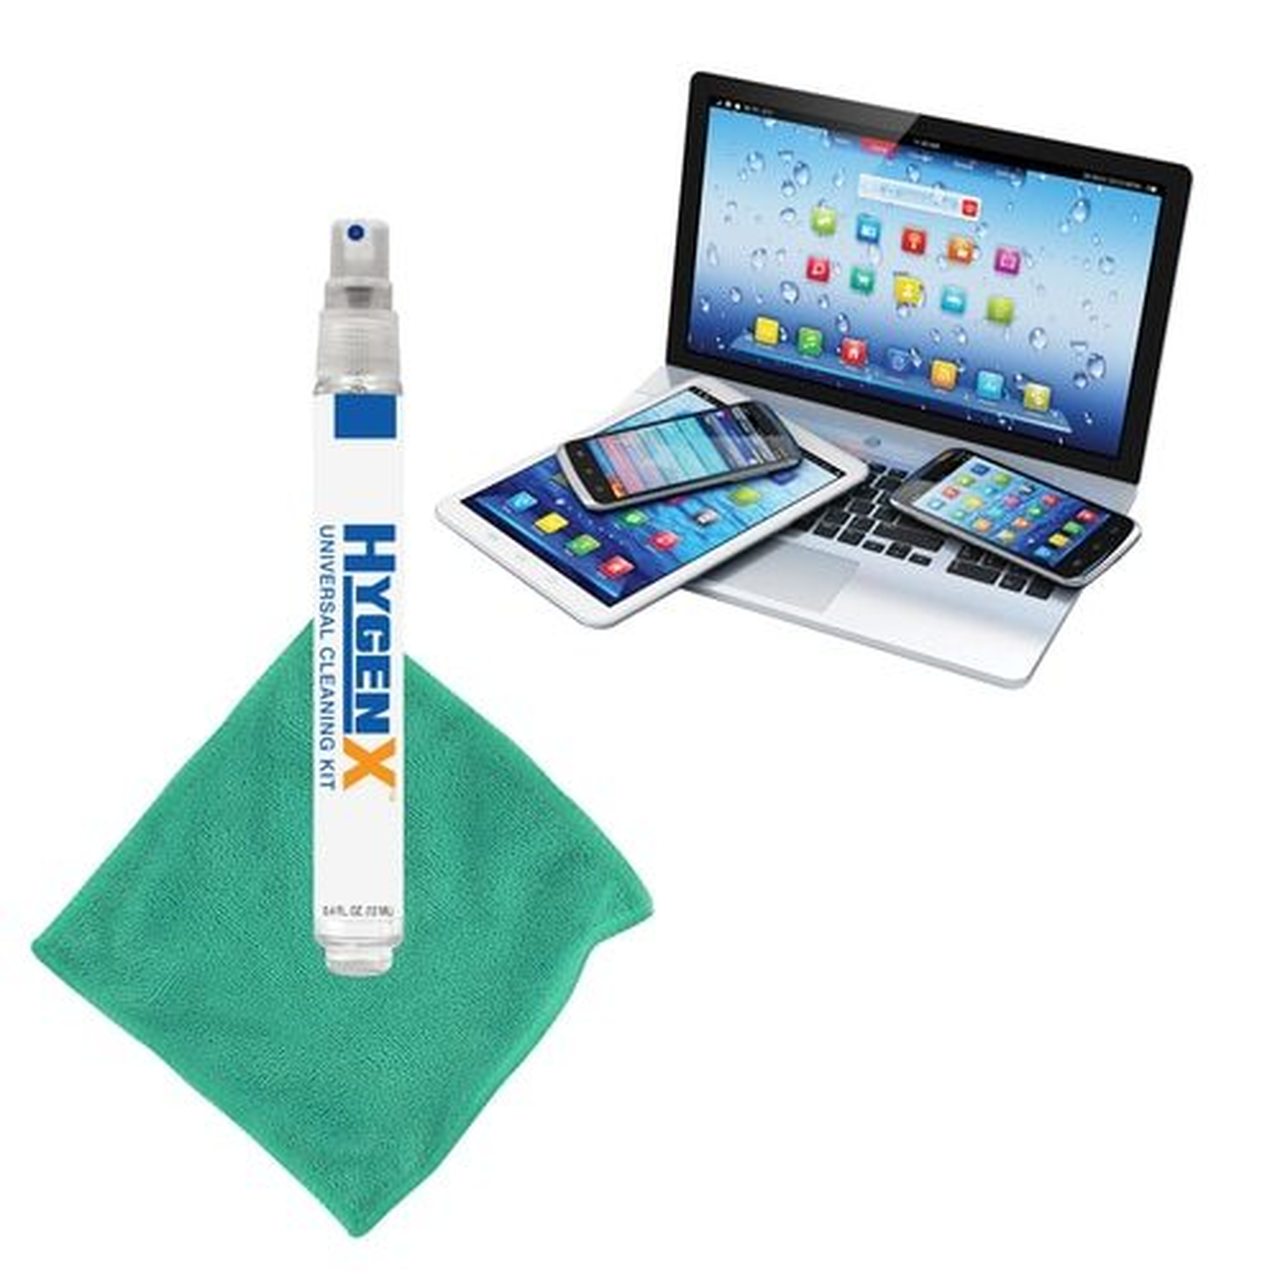 HamiltonBuhl HygenX Universal Cleaning Kit for Tablets, Laptops, Computers, Etc.